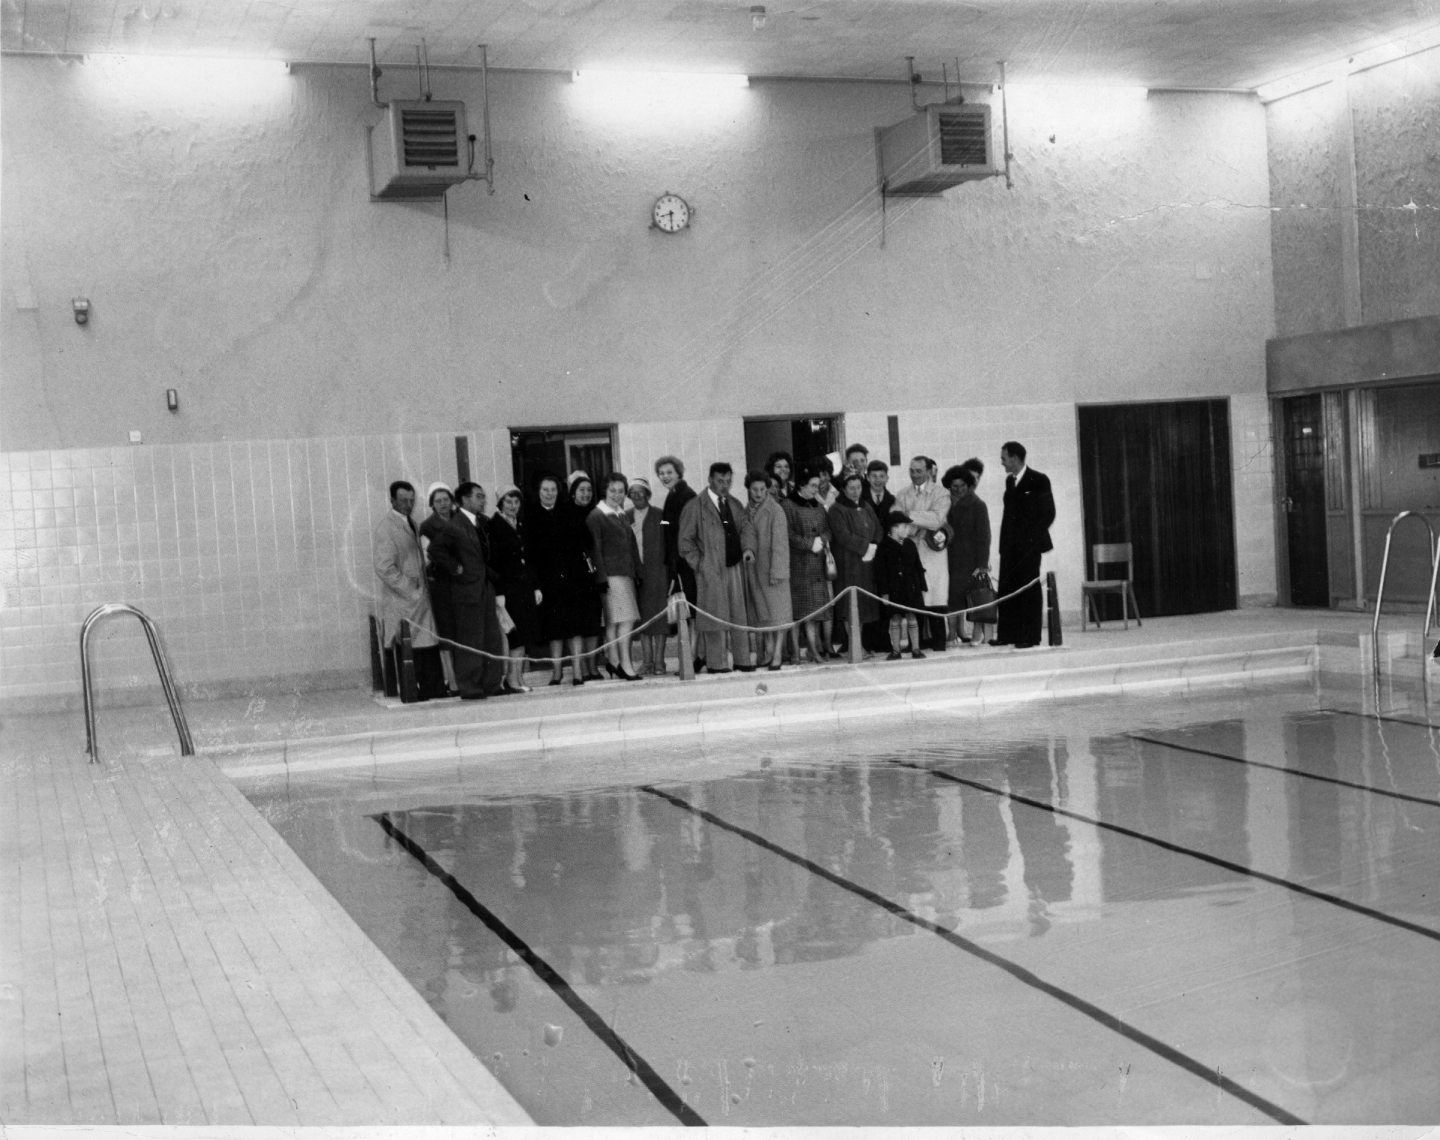 A small group of parents stand behind a cordon at the side of a large swimming pool at the opening of Summerhill Academy in 1962.